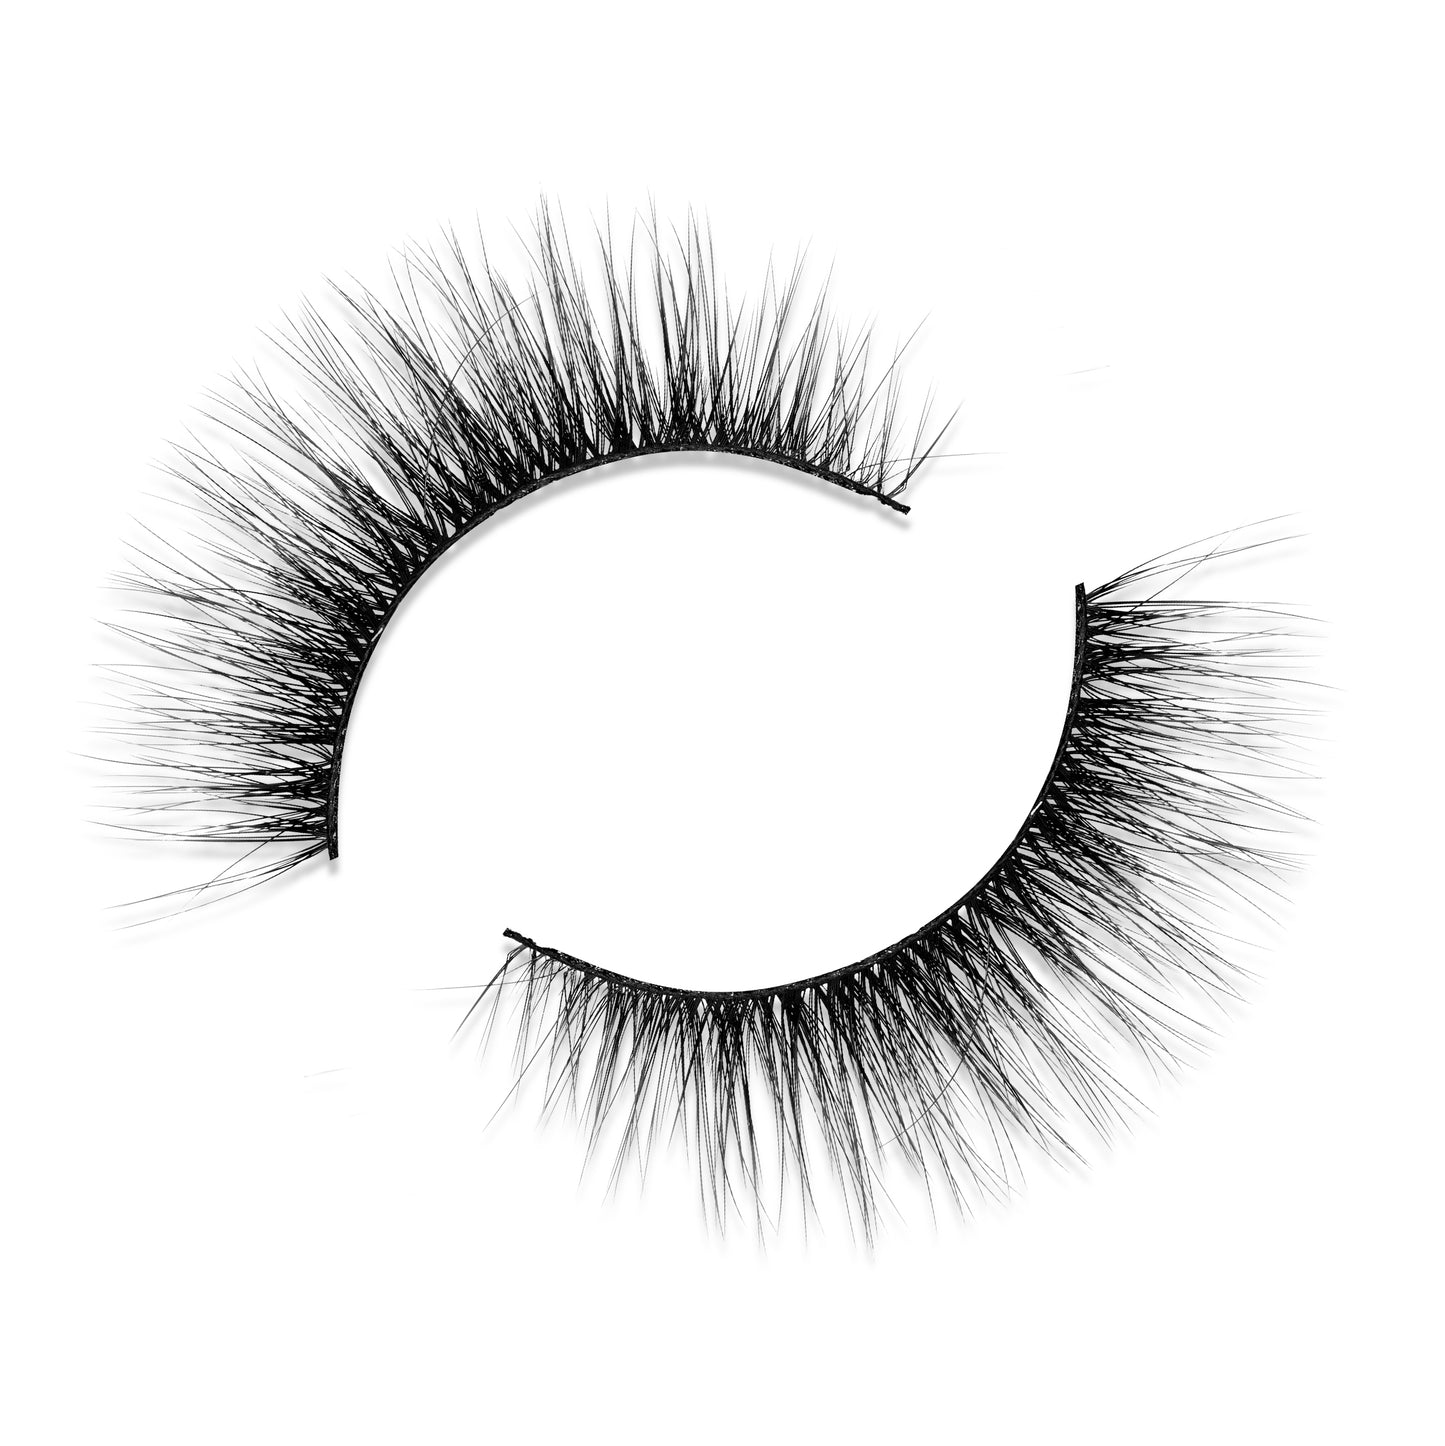 Professional  (Dainty) Multi Layer Strip Lashes #D62